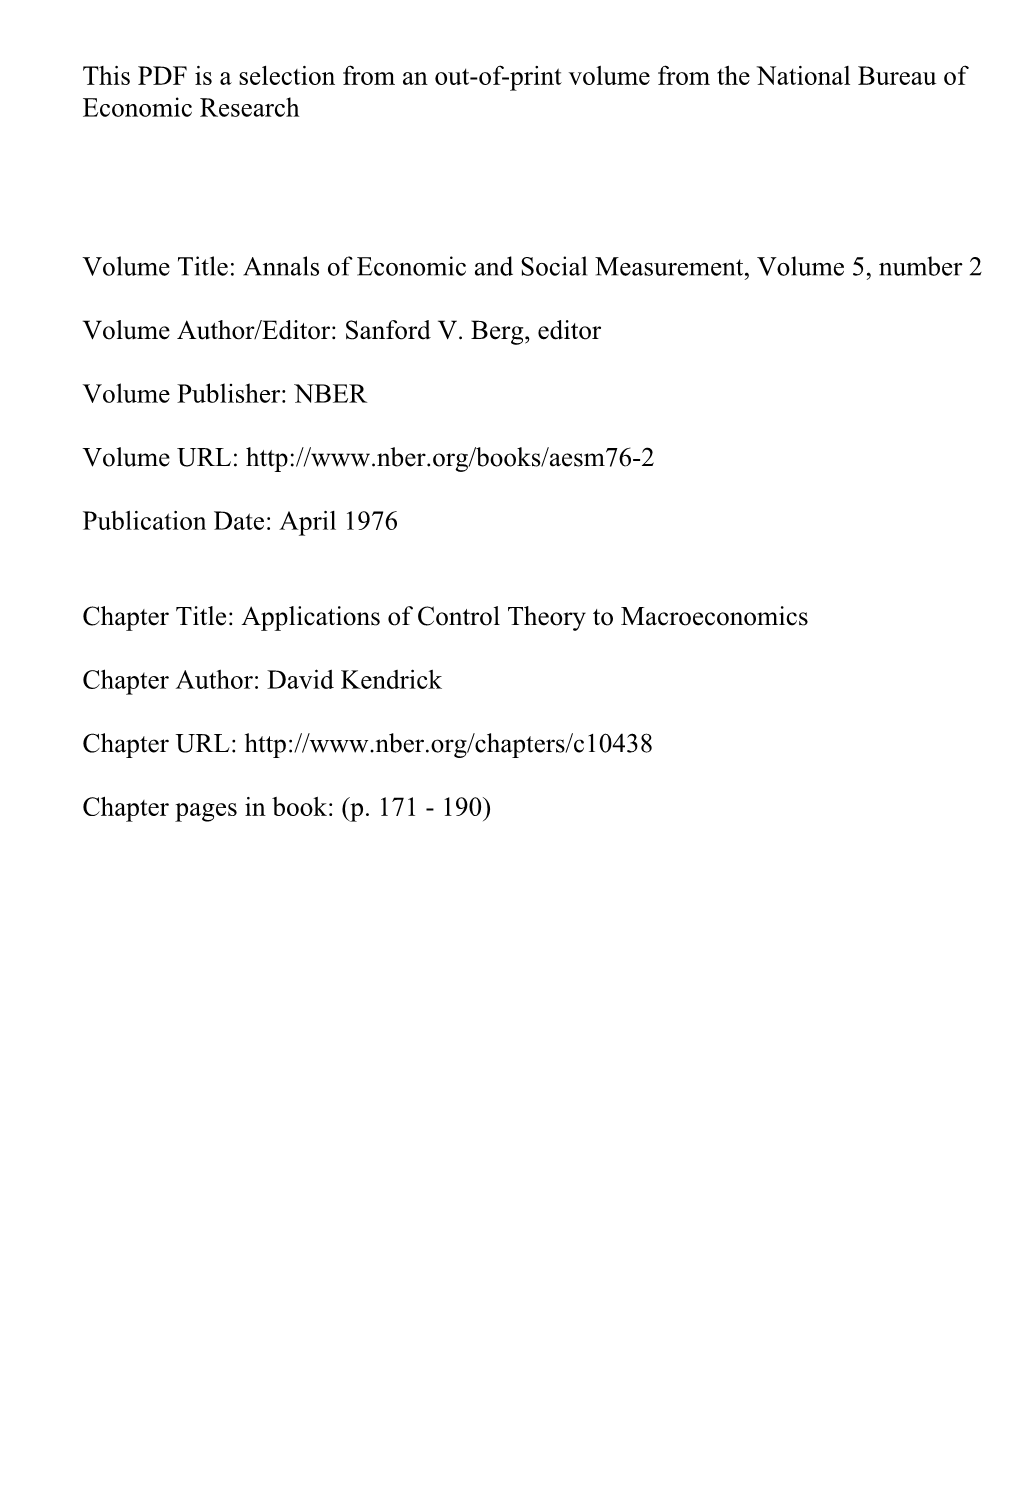 Applications of Control Theory to Macroeconomics